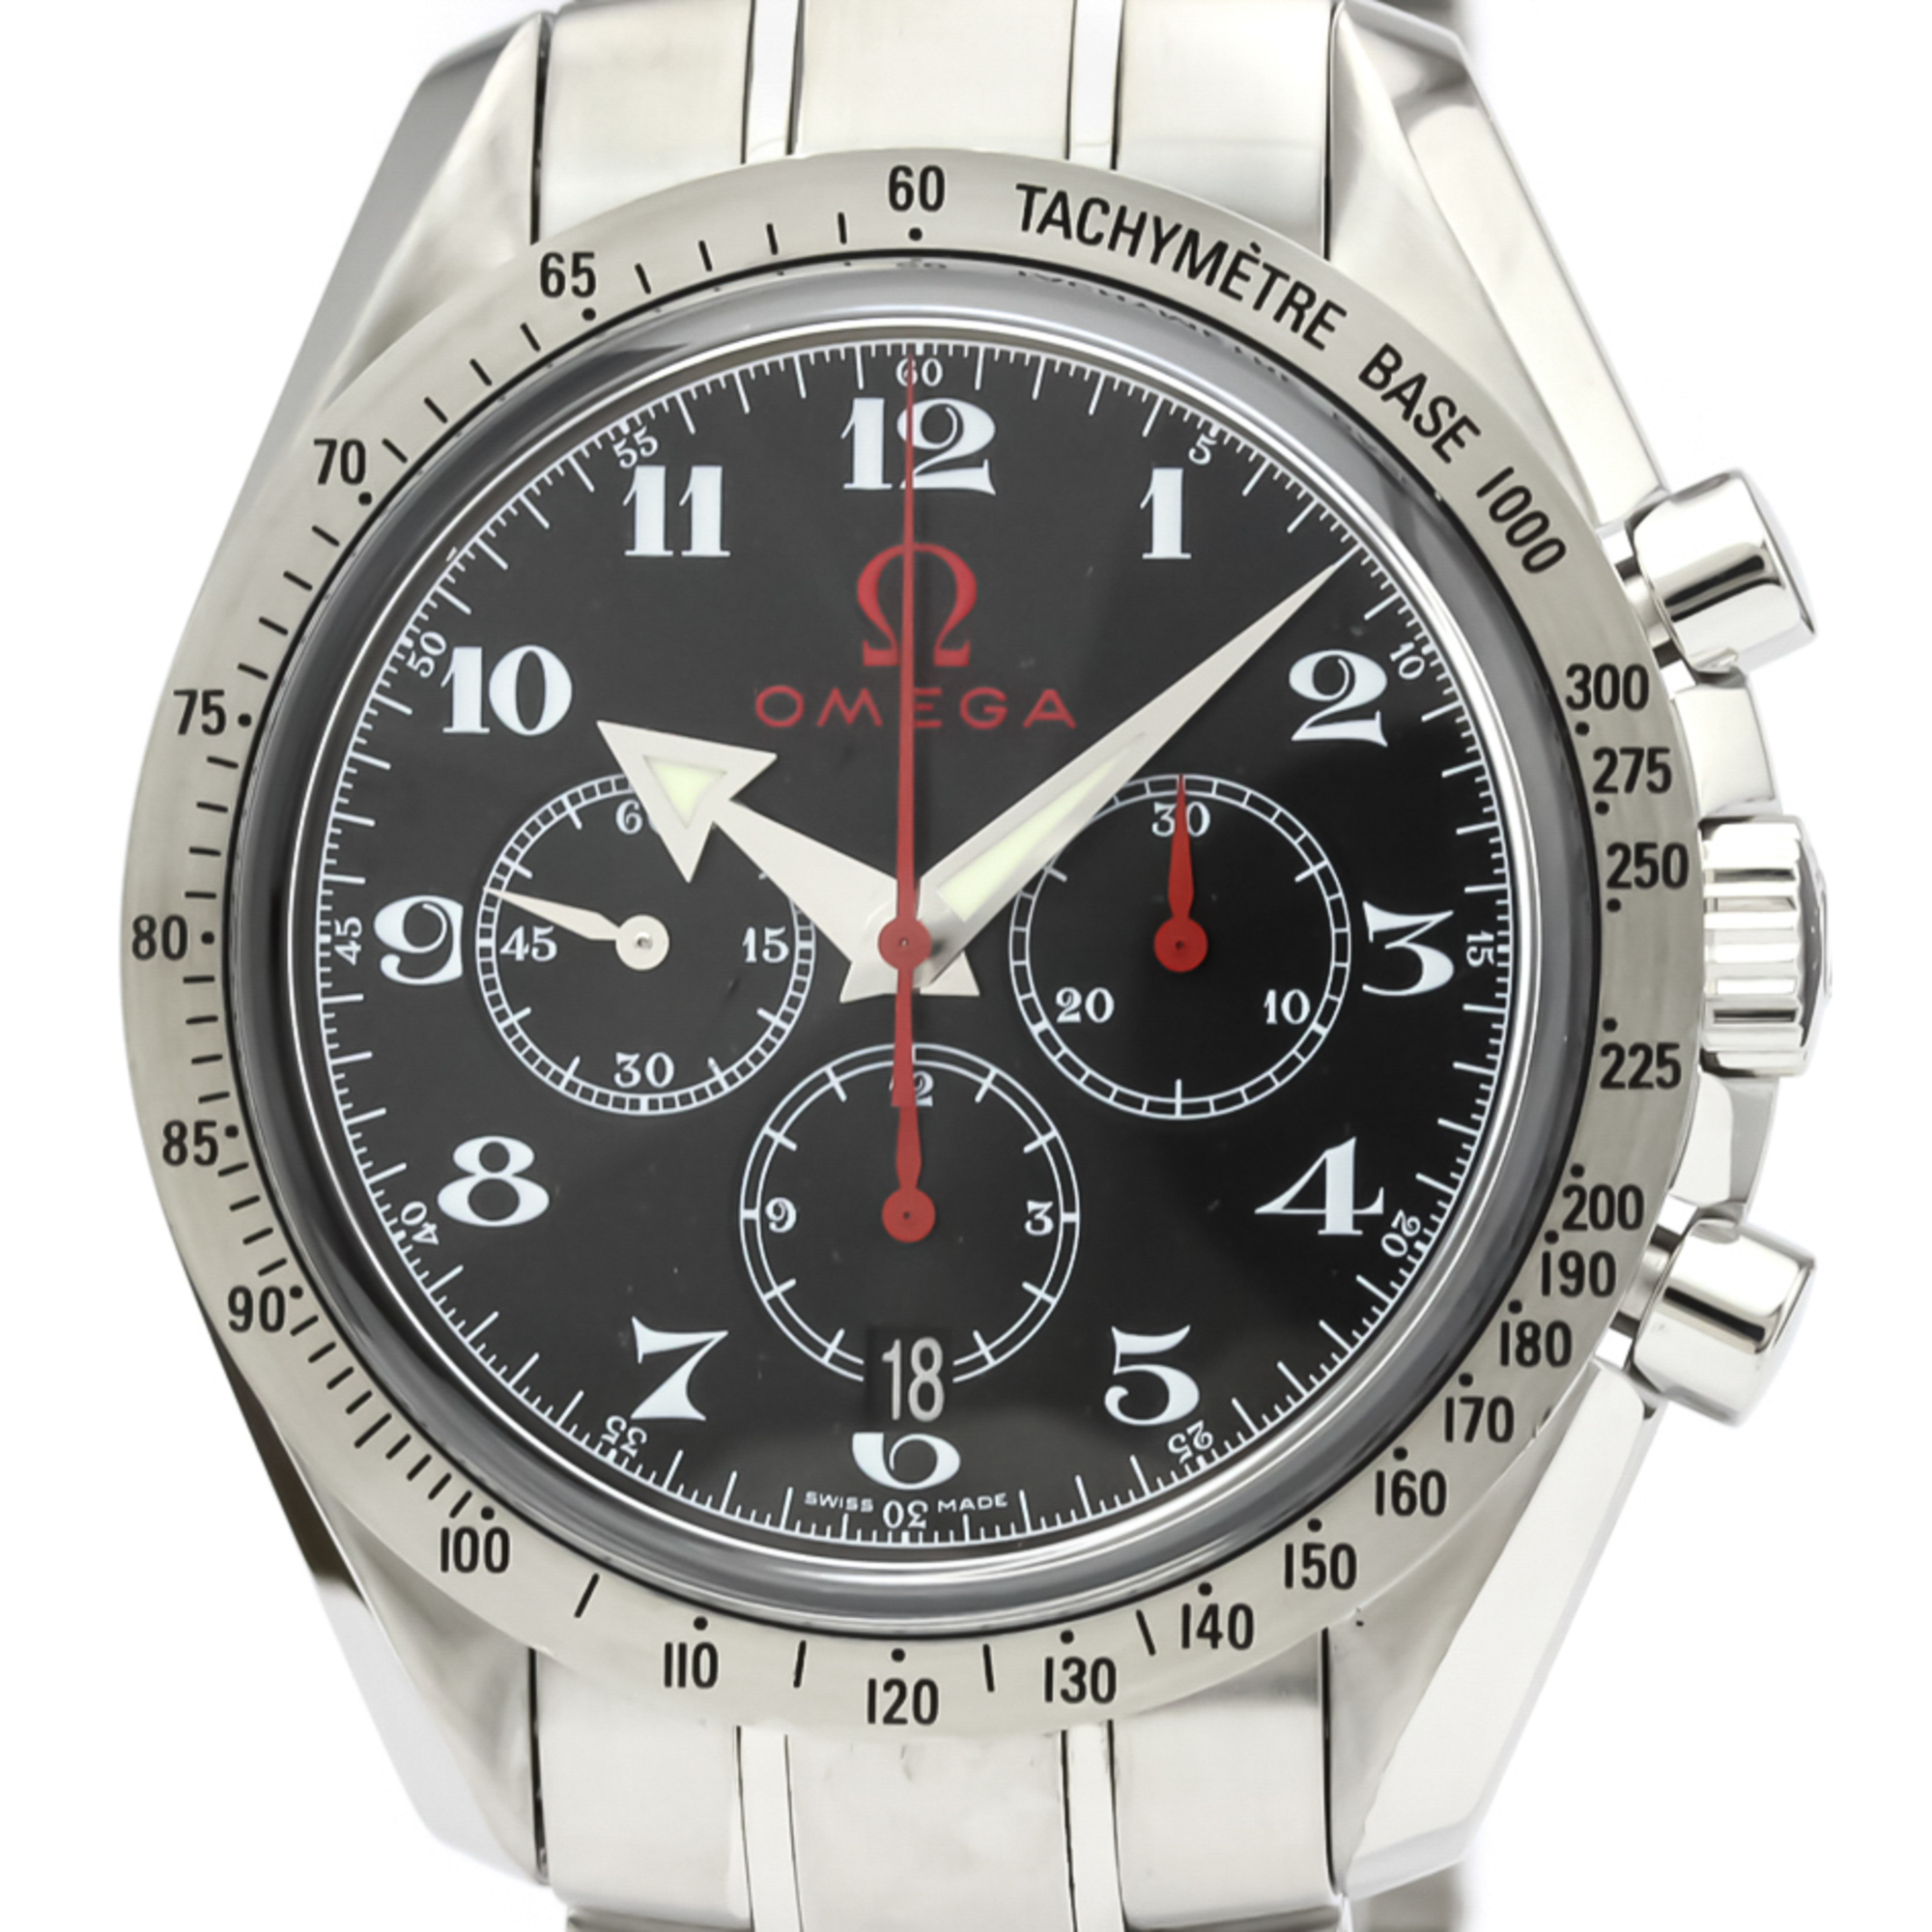 Omega Speedmaster Automatic Stainless Steel Men's Sports Watch 3558.50